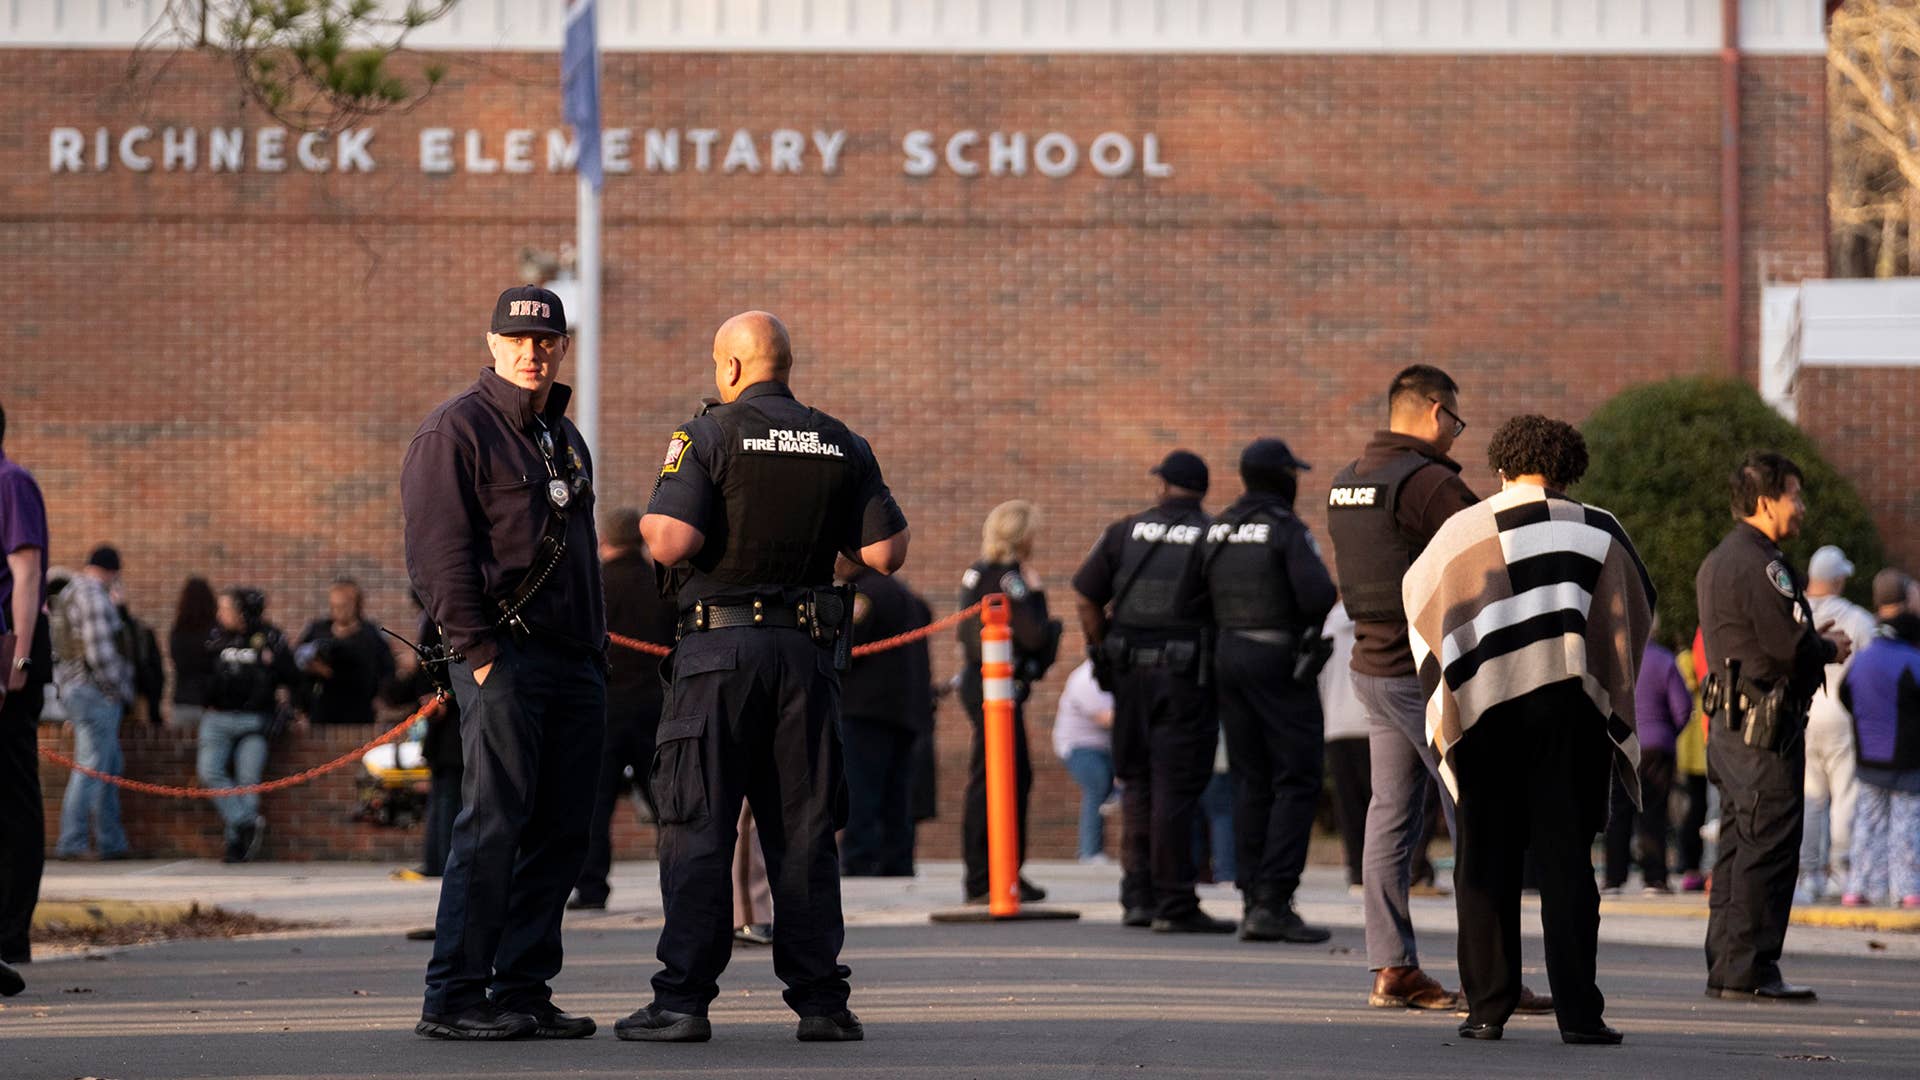 Police respond to a shooting that injured a teacher at Richneck Elementary in Newport News, Virginia